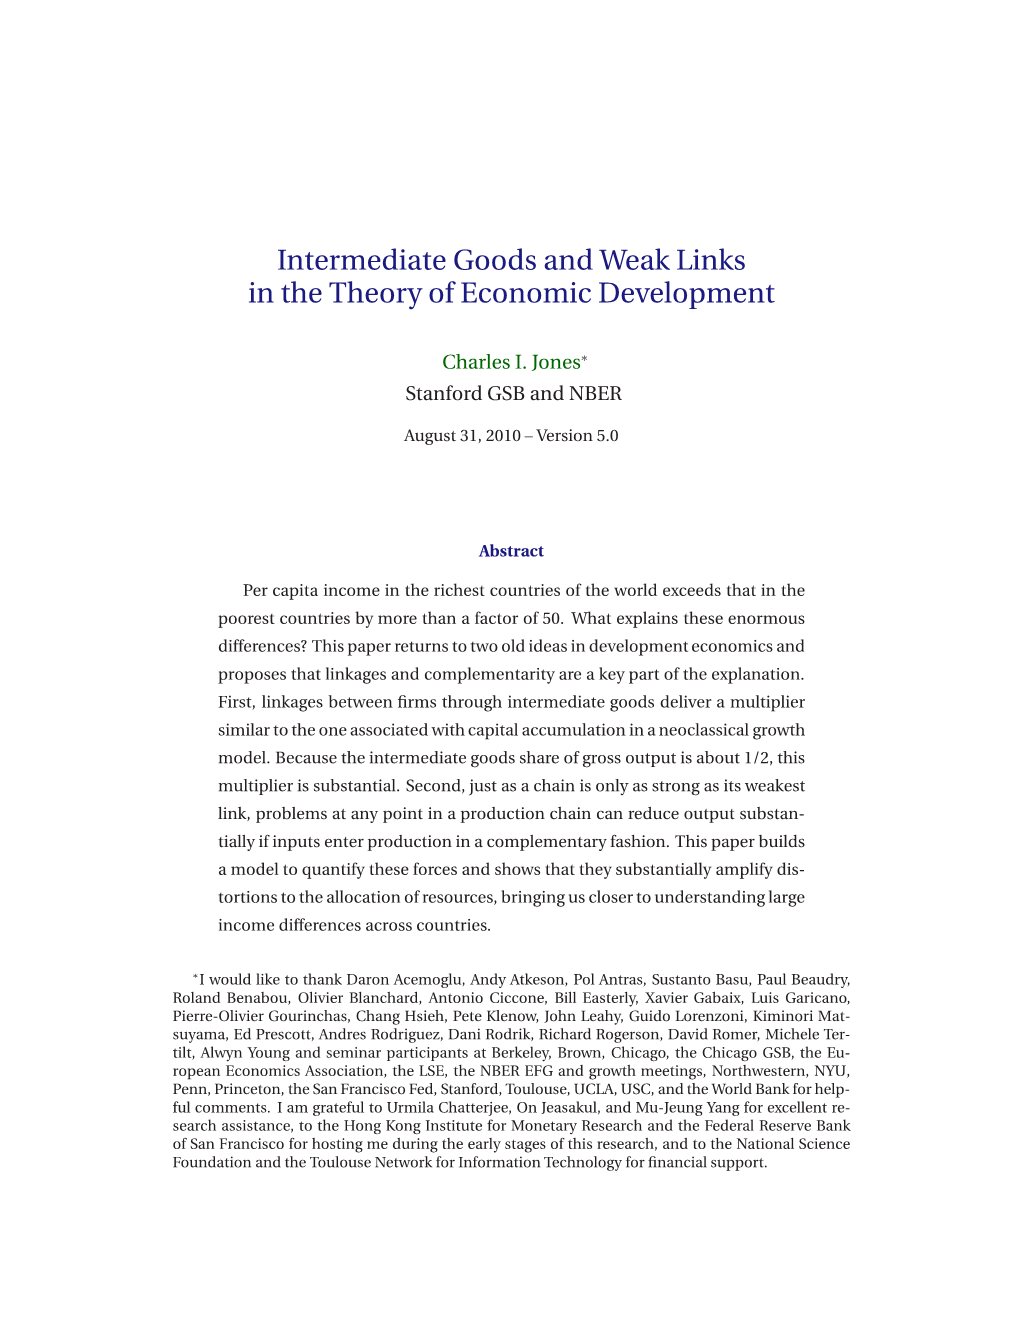 Intermediate Goods and Weak Links in the Theory of Economic Development